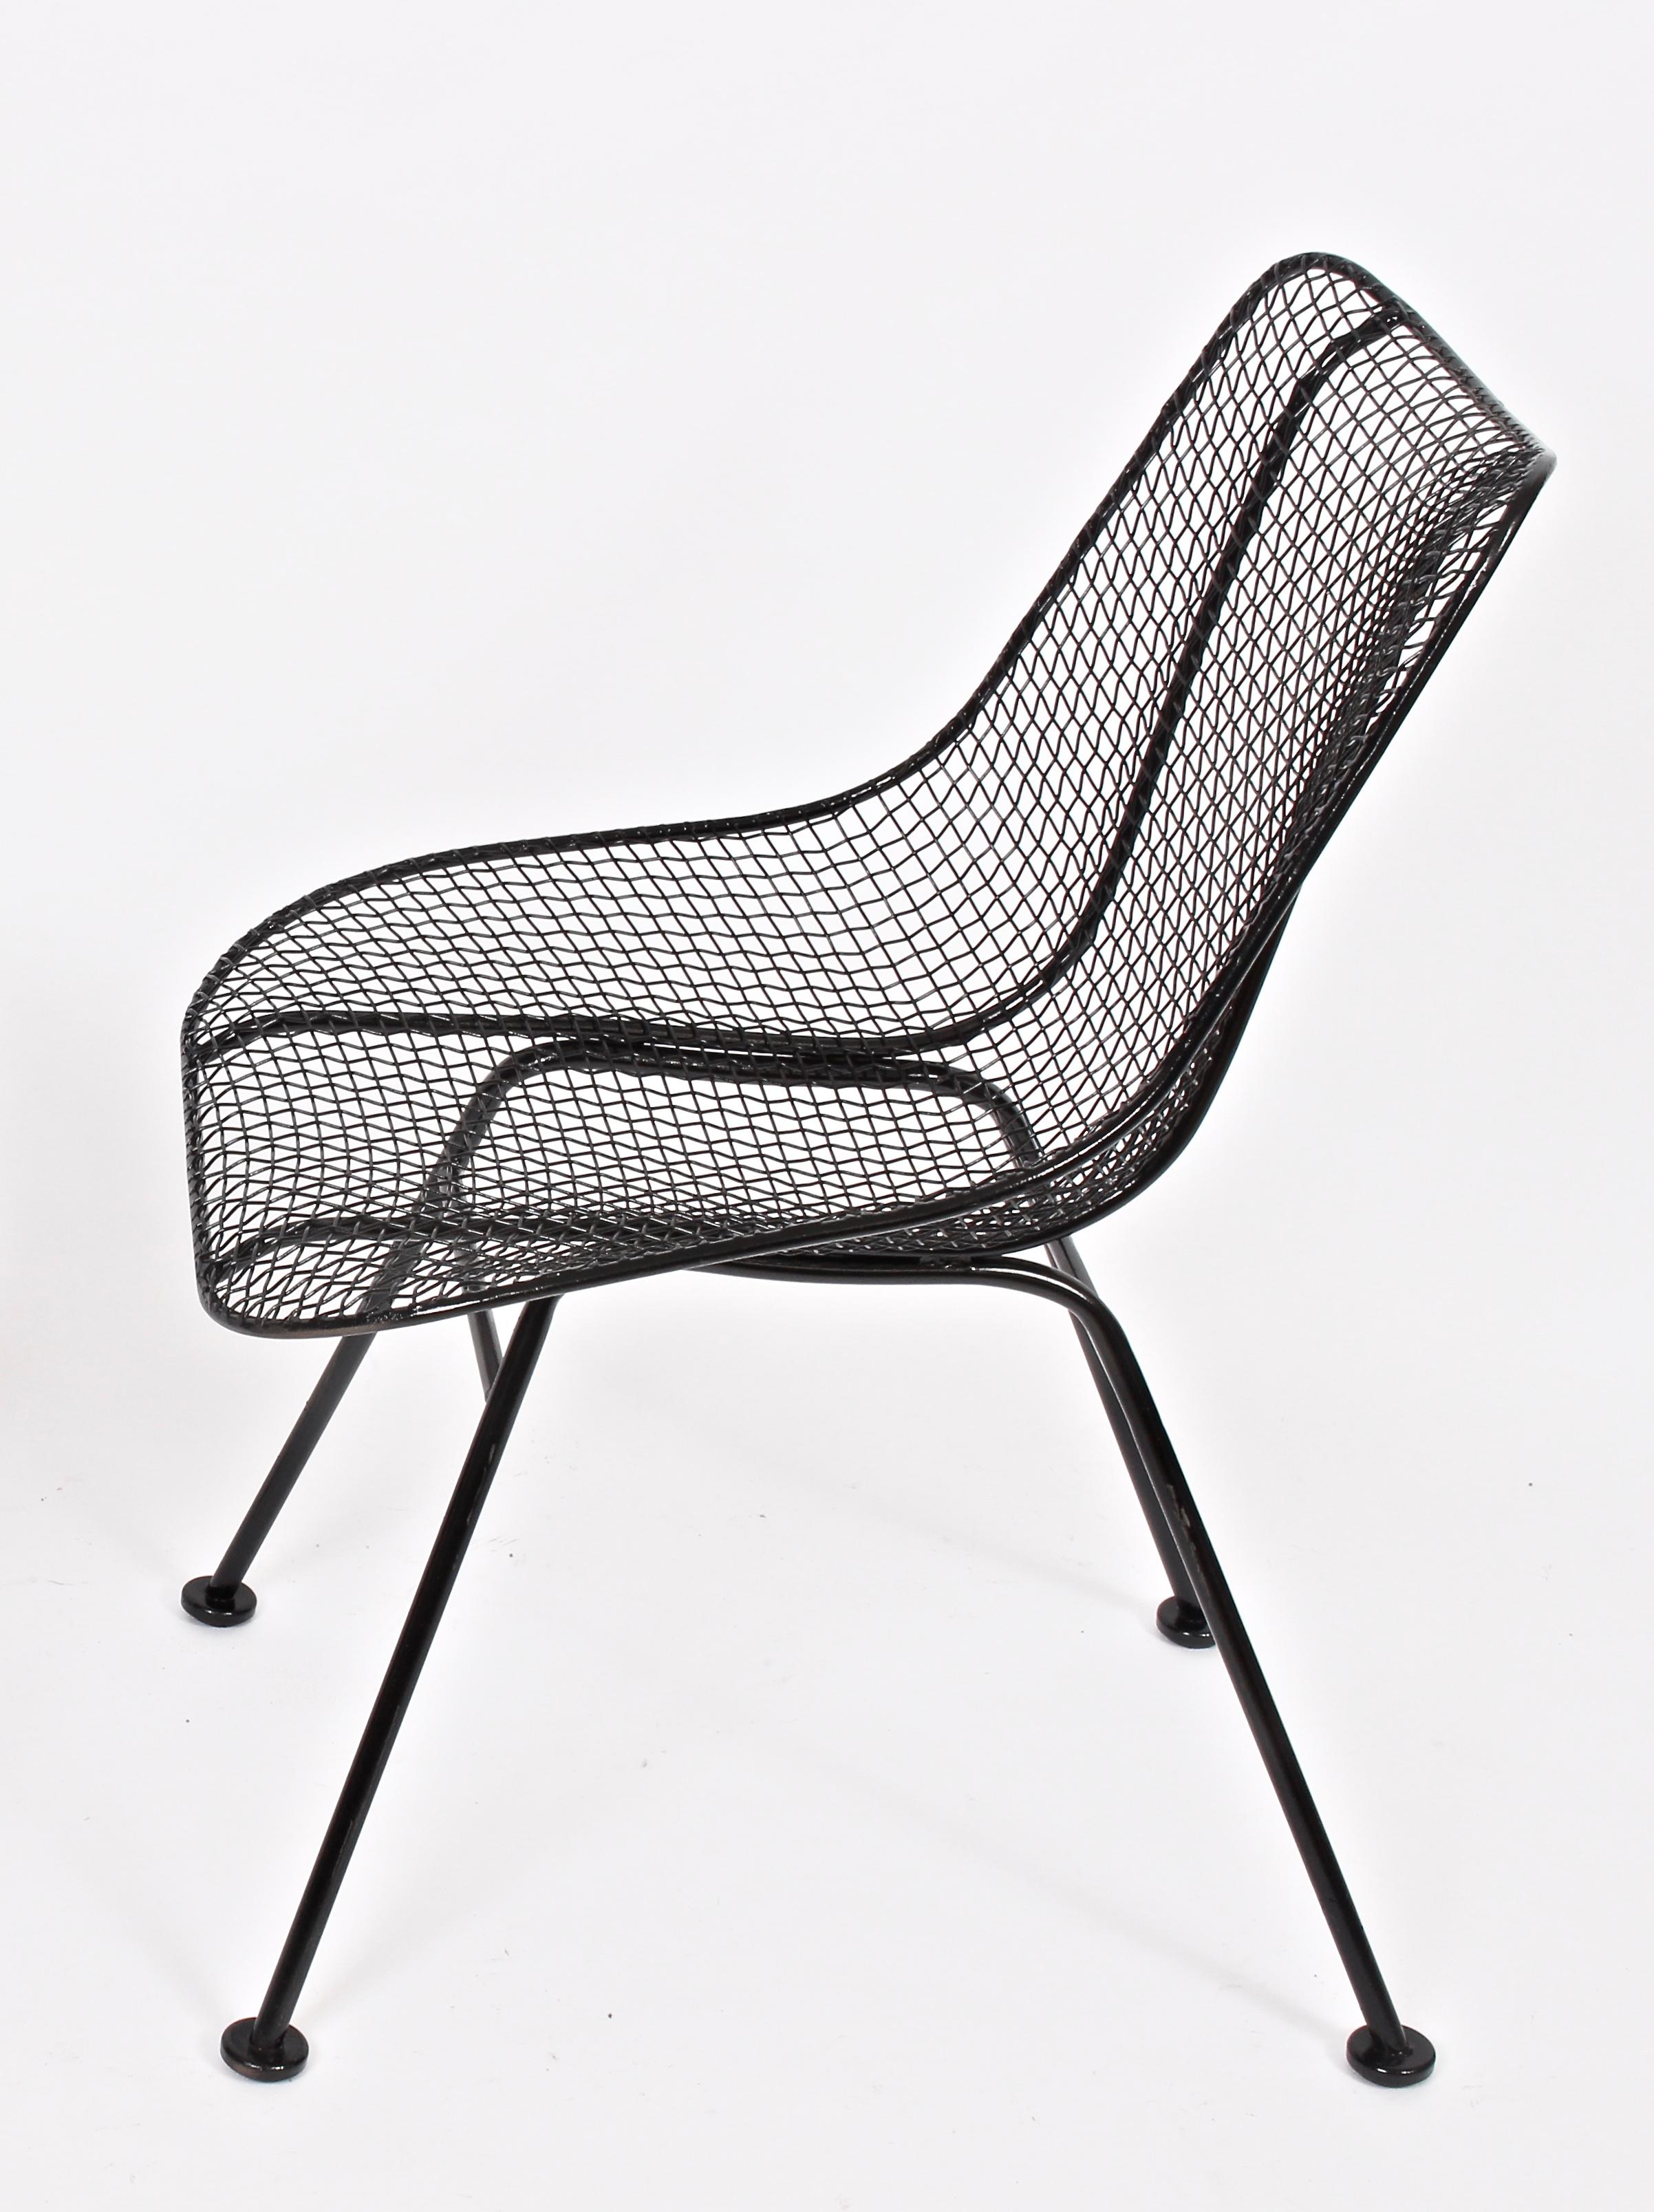 Single Russell Woodard glossy black enamel Sculptura dining height side chair, 1950's. Handcrafted in wrought iron and woven wire mesh. Suitable for Indoor / Outdoor use. Lightly restored. Professionally powder coated and painted in gloss black